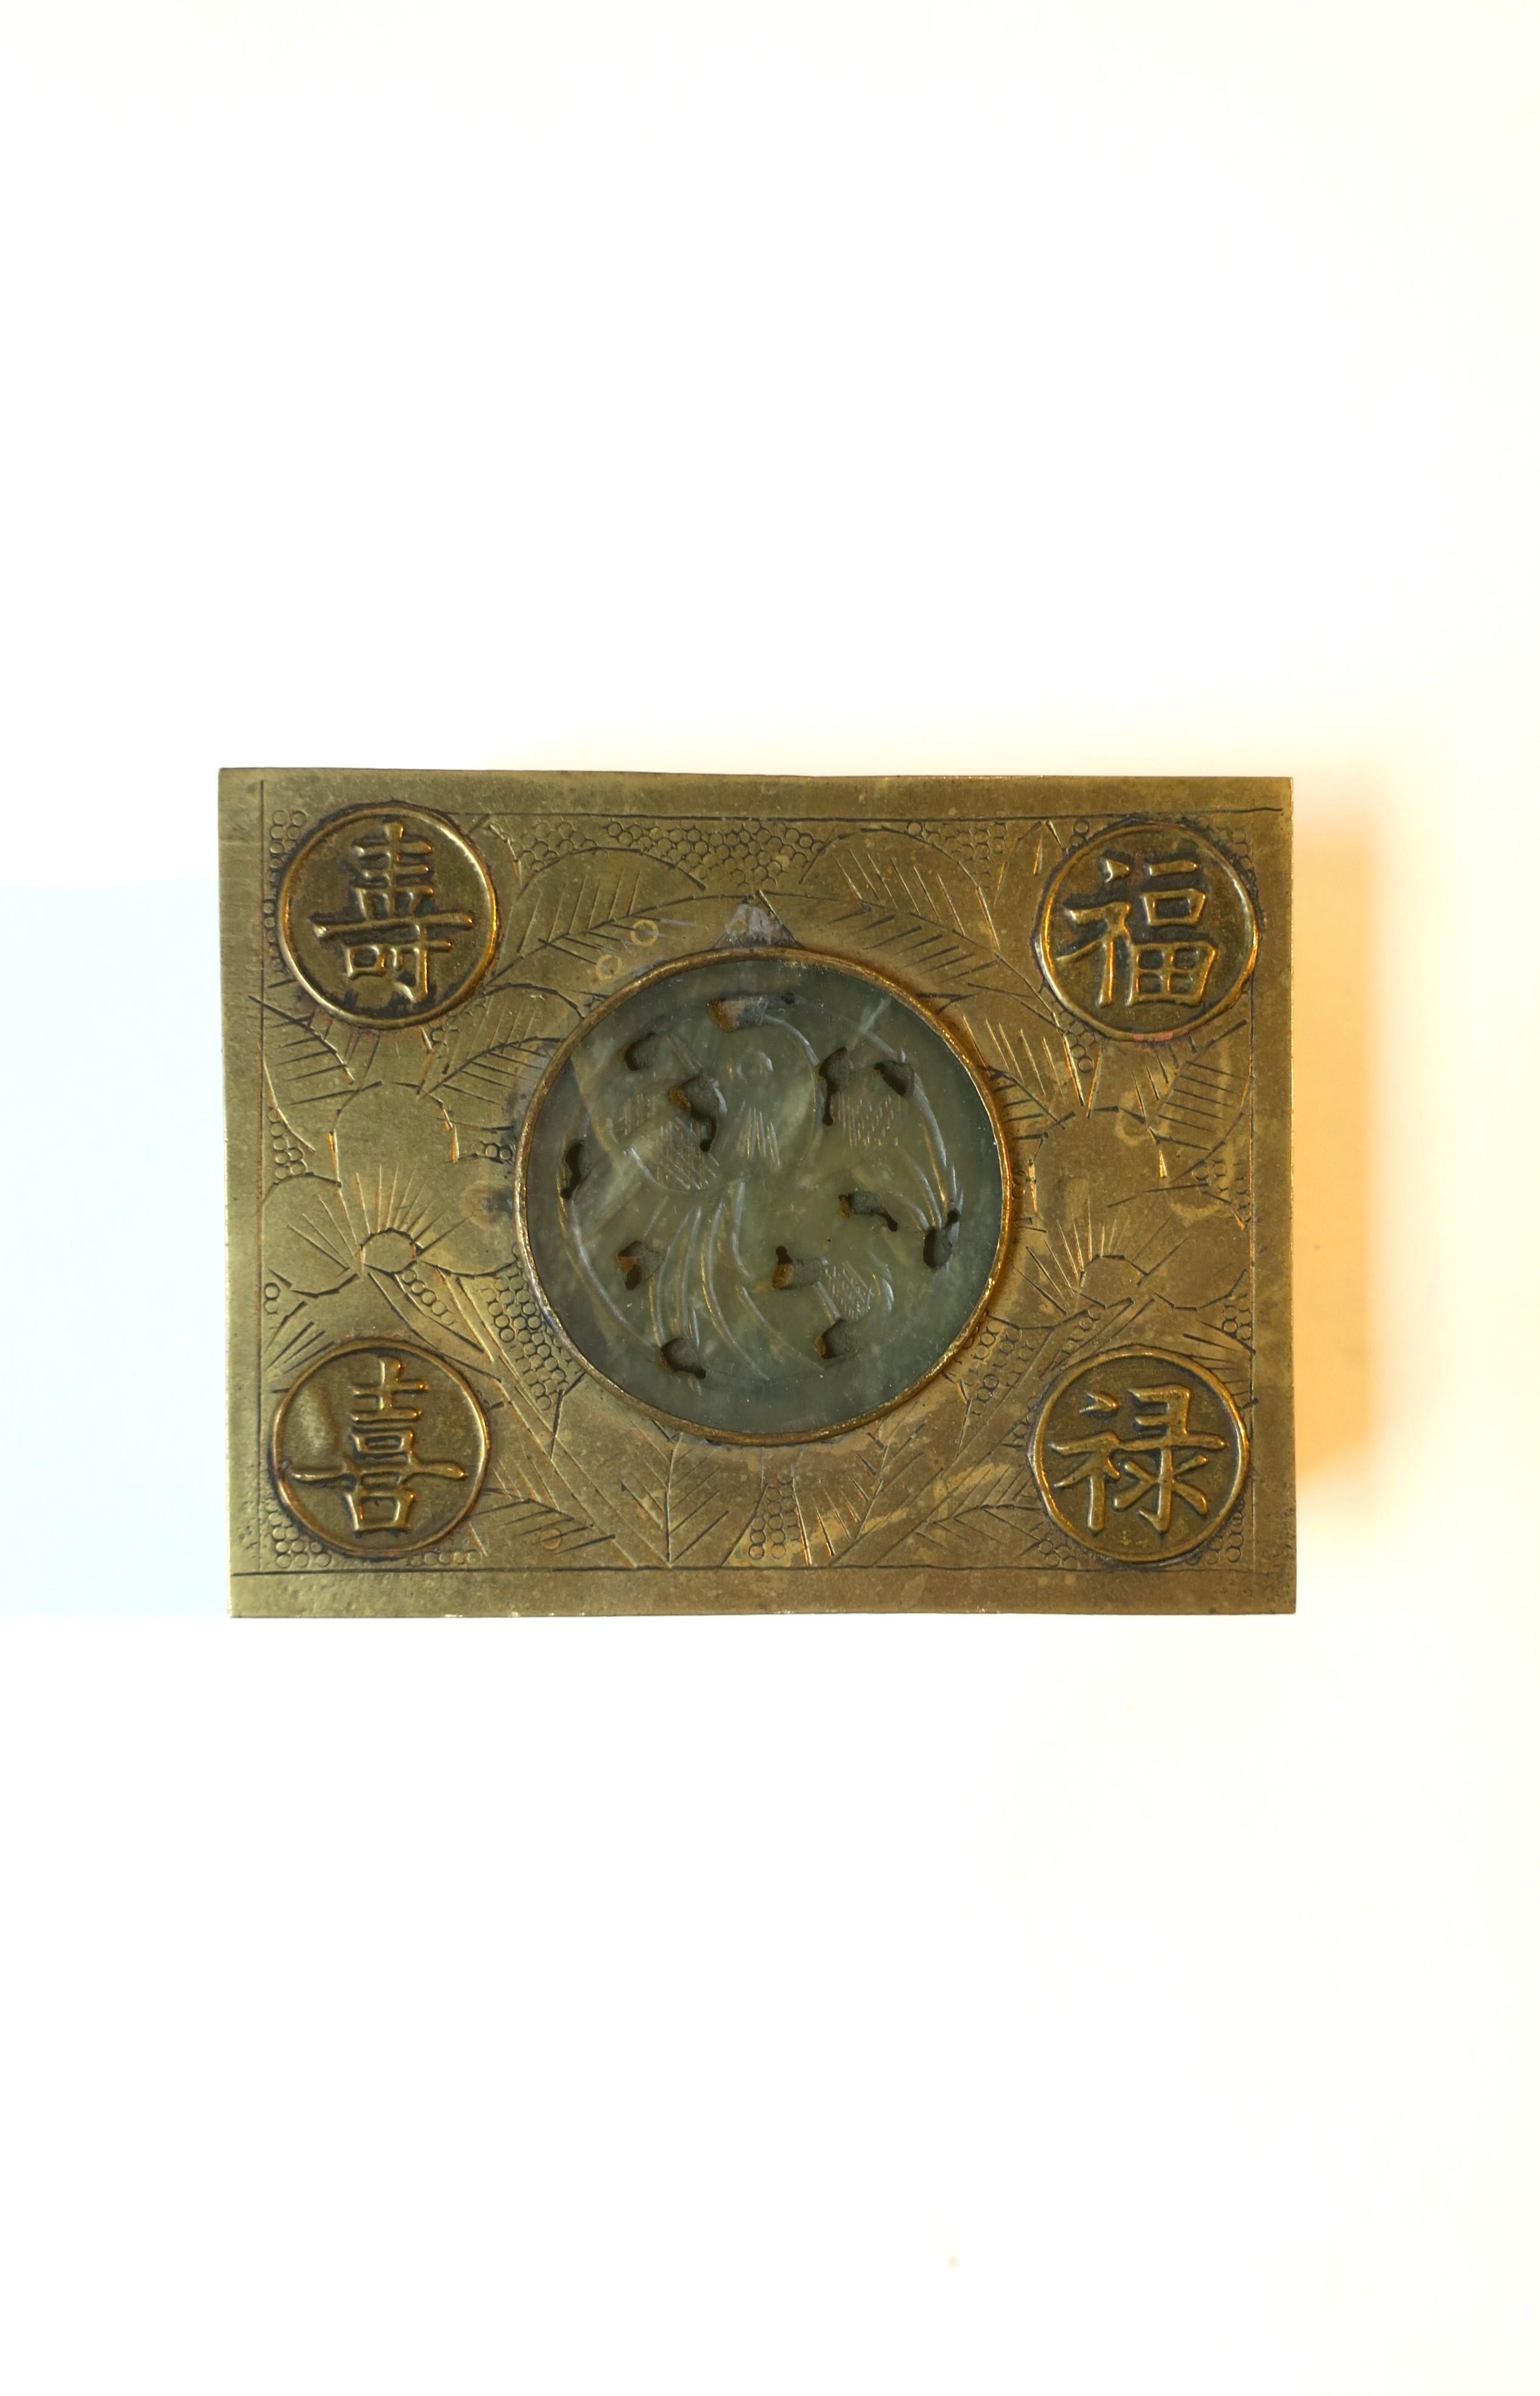 An Asian brass cigarette box with serpentine stone and hand engraving, circa mid-20th century, China. This brass box has a teak wood lining, a round centre serpentine stone that resembles jade, and hand engraved with leaves and flowers. Piece is